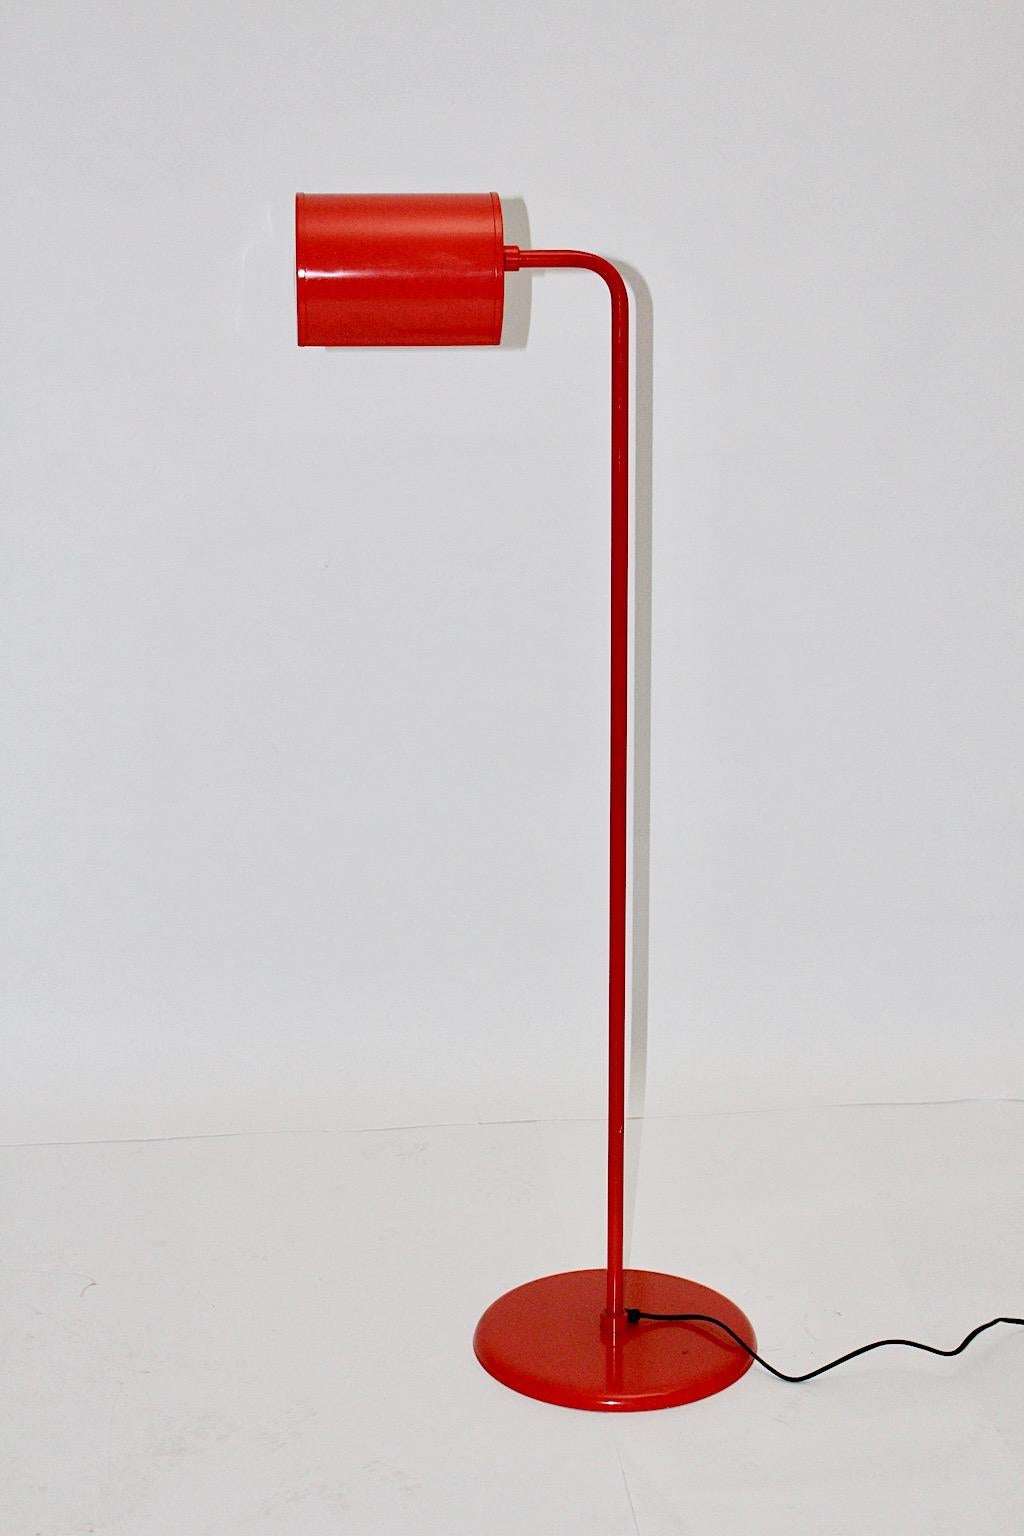 A Mid-Century Modern red metal vintage floor lamp, which was designed and manufactured by Abo Randers circa 1970, Denmark.
The bold red color feels fresh and the simple cute design makes this floor lamps fantastic to add a little splash into your